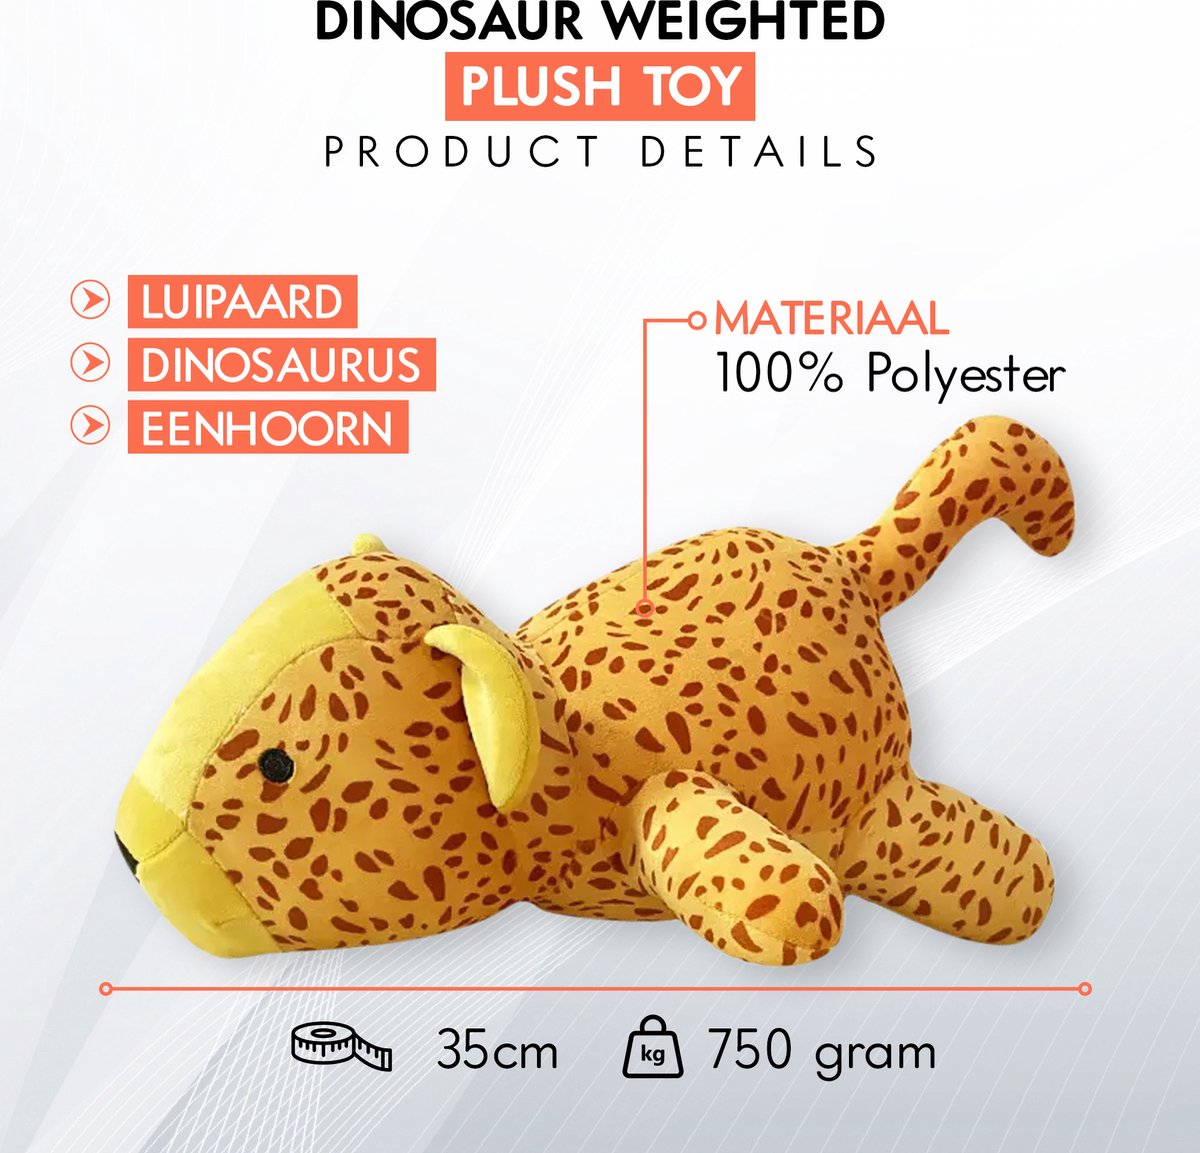 Weighted cuddly toy 35cm - Yellow